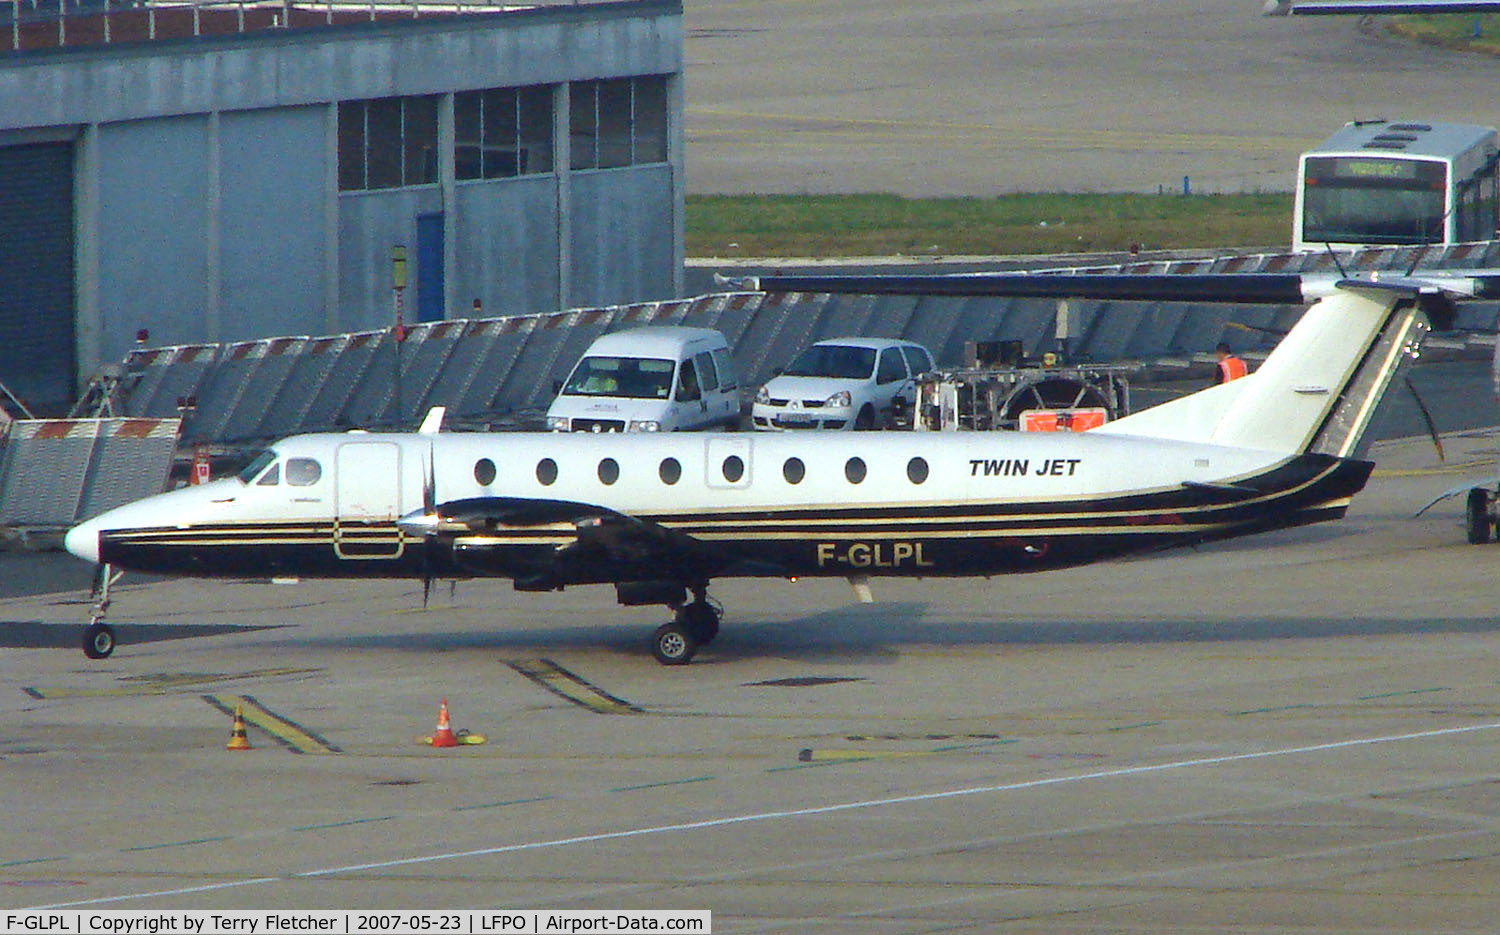 F-GLPL, Beech 1900C C/N UC-92, French Commuter airline Twin Jet in a revised colour scheme